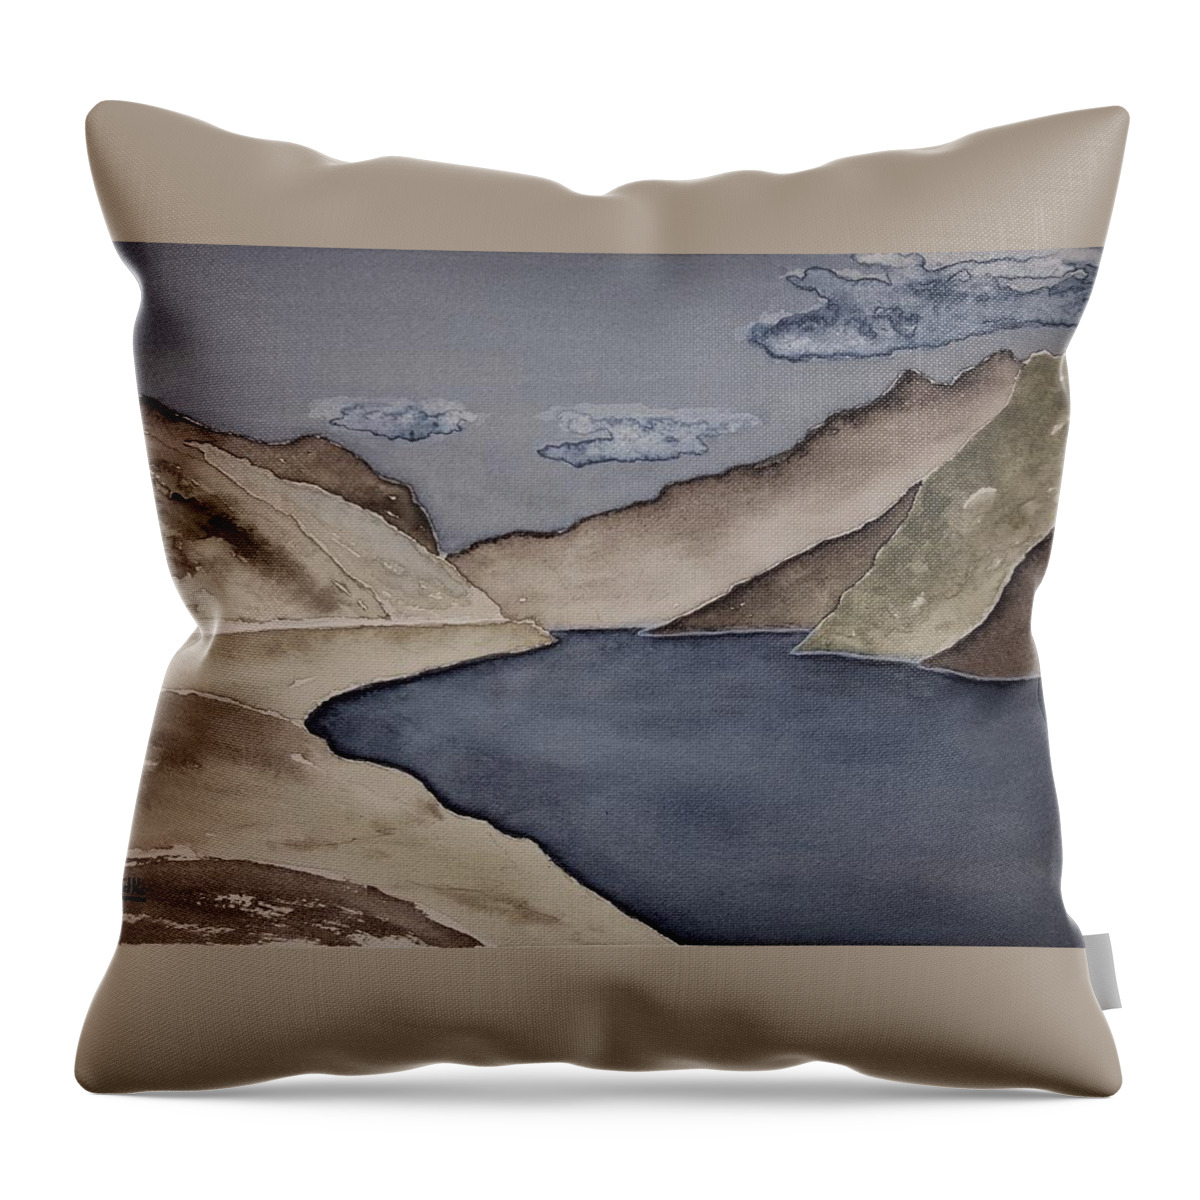 Watercolor Throw Pillow featuring the painting Gray Land Lore by John Klobucher